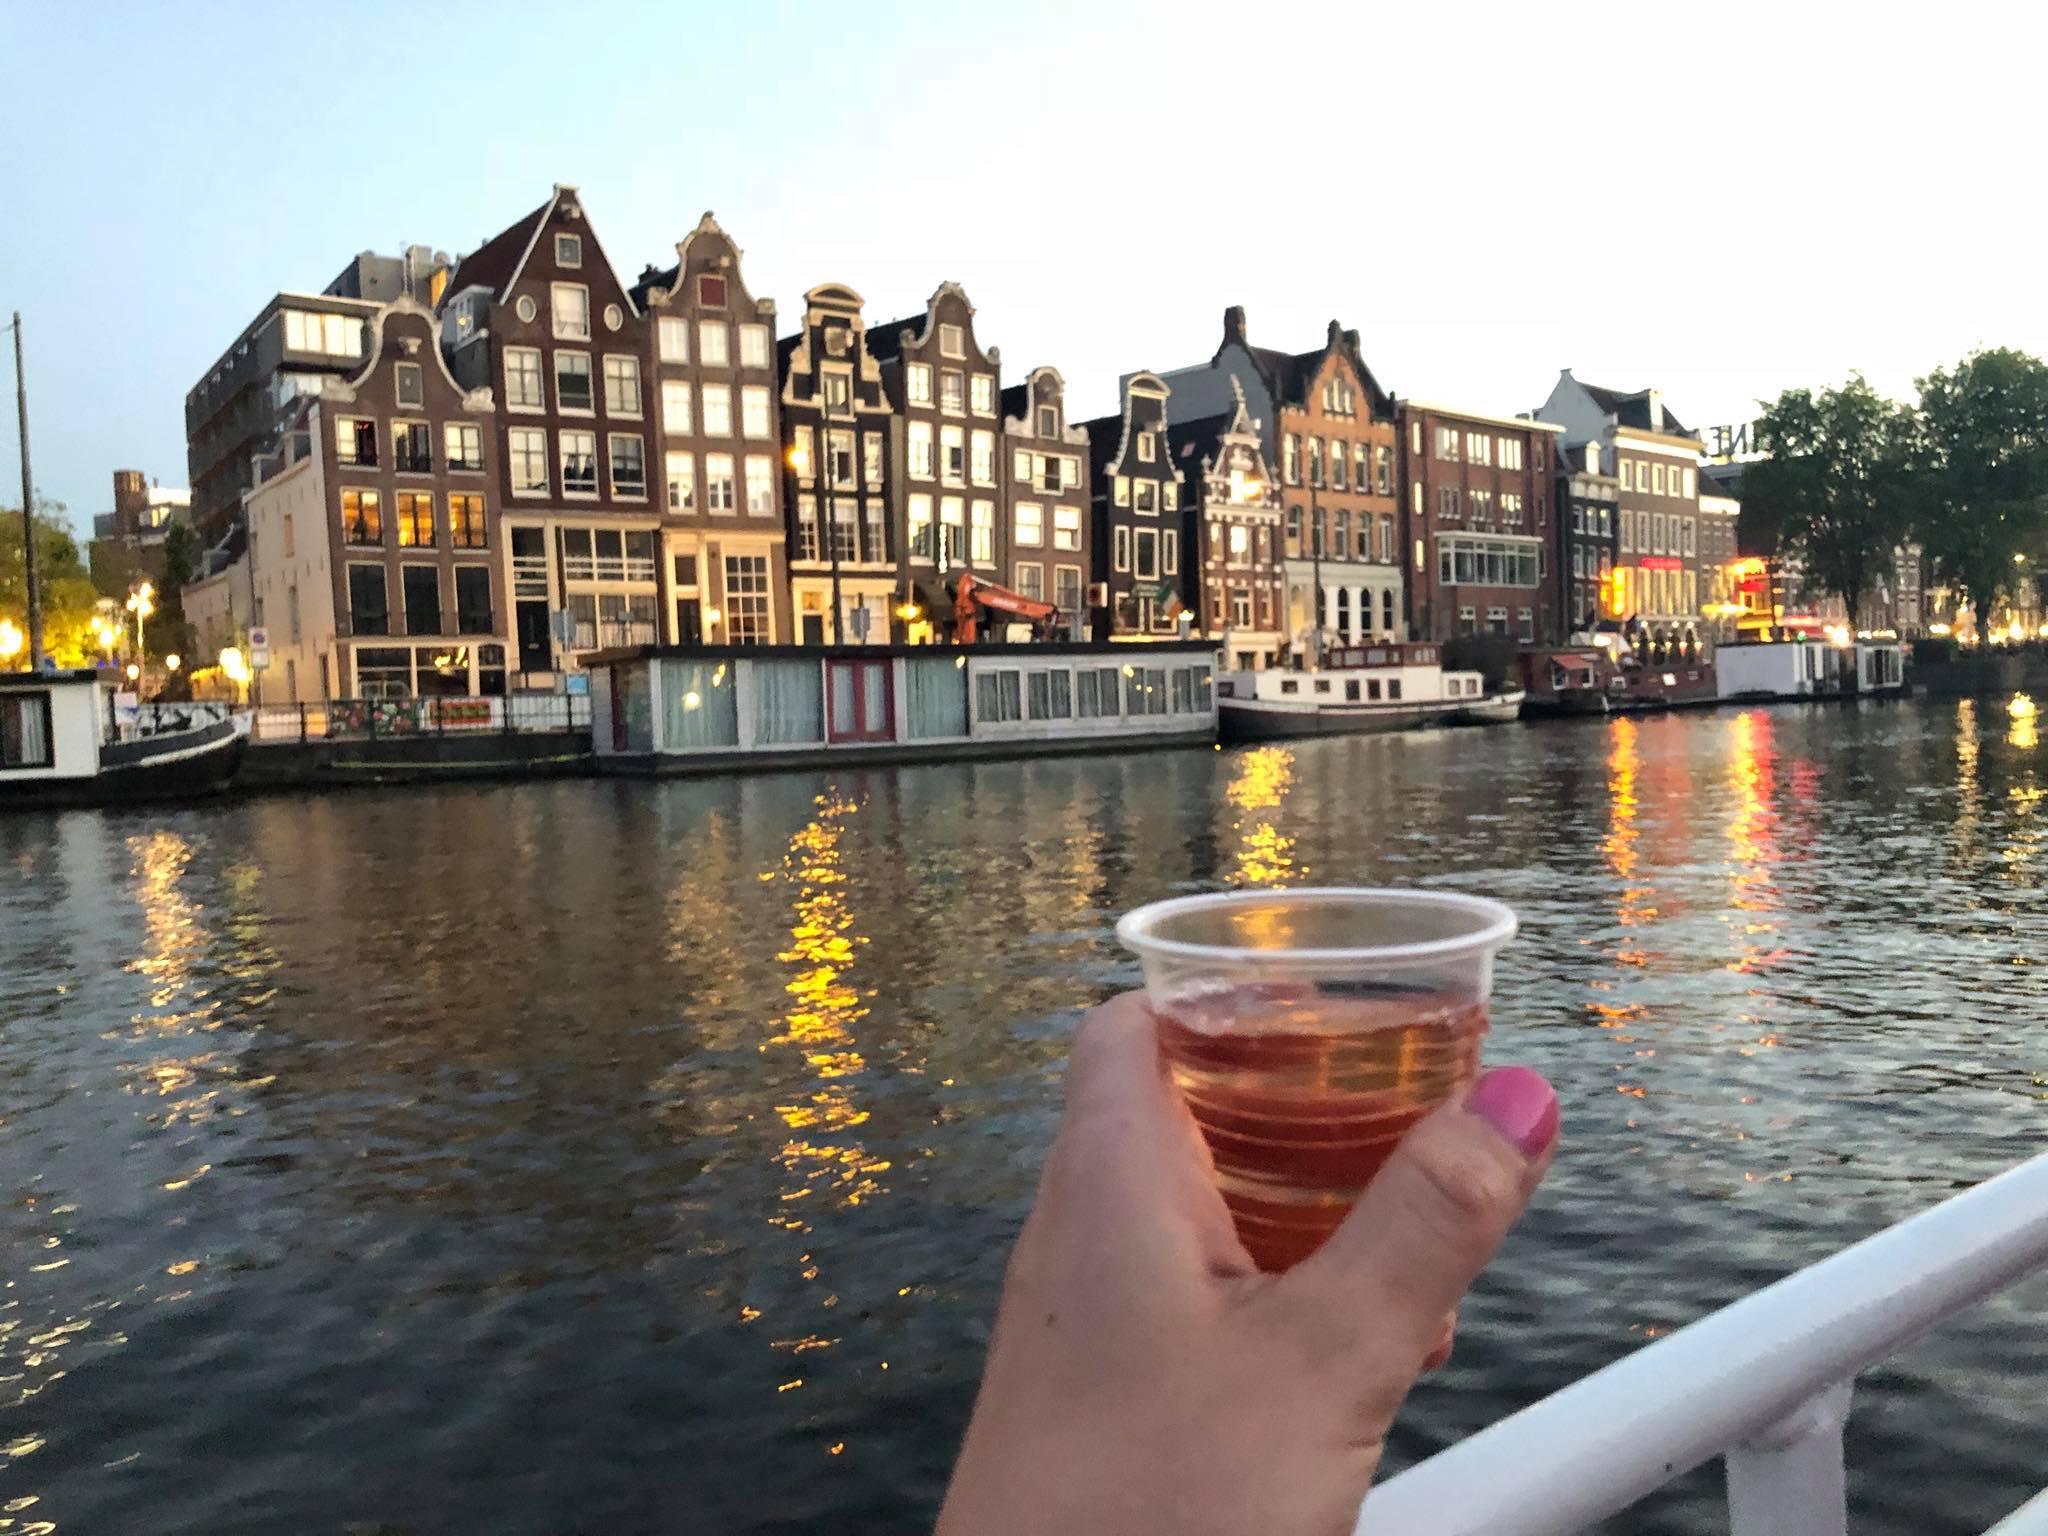 Drinking wine on a canal cruise in Amsterdam